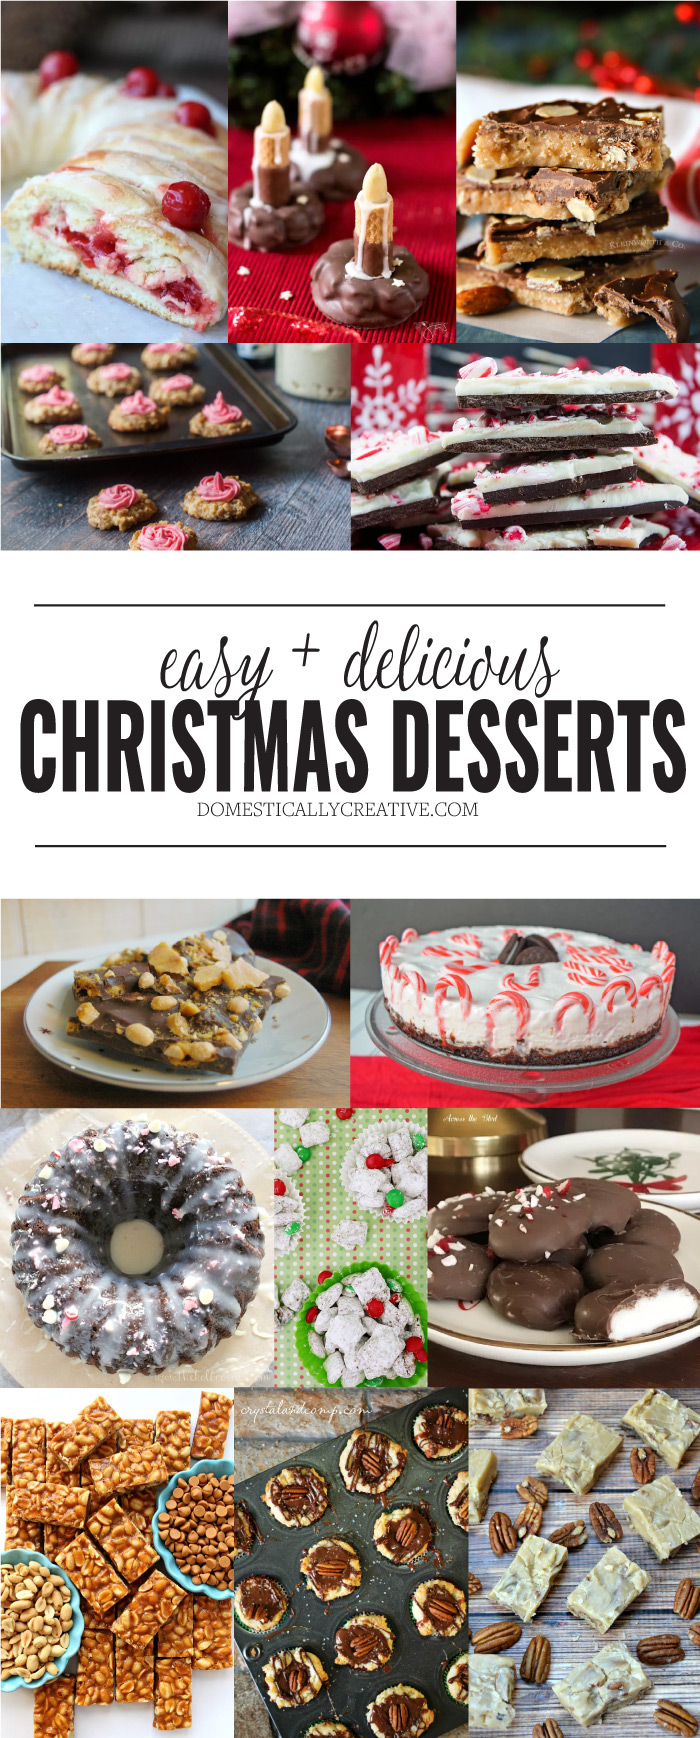 Lots of easy and delicious christmas dessert recipe ideas to enjoy this season OR give as a gift! #christmasdessertrecipes #christmasdessert #christmasdesserts #christmasgoodies #christmasfoodgifts